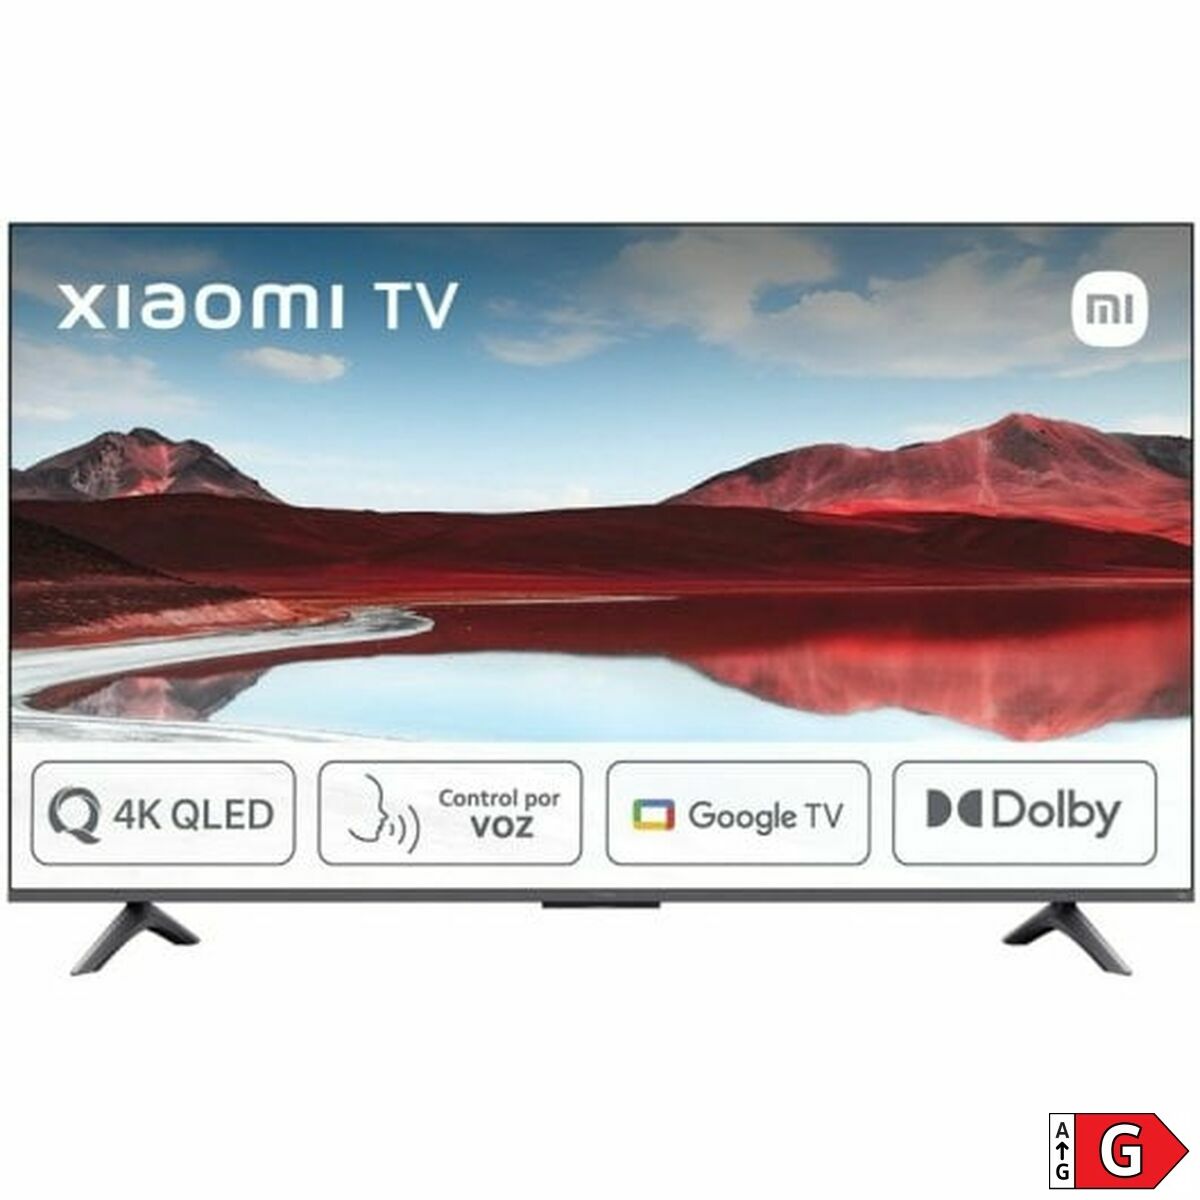 Smart TV Xiaomi A PRO 2025 65" 4K Ultra HD LED HDR QLED, Xiaomi, Electronics, TV, Video and home cinema, smart-tv-xiaomi-a-pro-2025-65-4k-ultra-hd-led-hdr-qled, Brand_Xiaomi, category-reference-2609, category-reference-2625, category-reference-2931, category-reference-t-18805, category-reference-t-18827, category-reference-t-19653, cinema and television, Condition_NEW, entertainment, Price_600 - 700, RiotNook